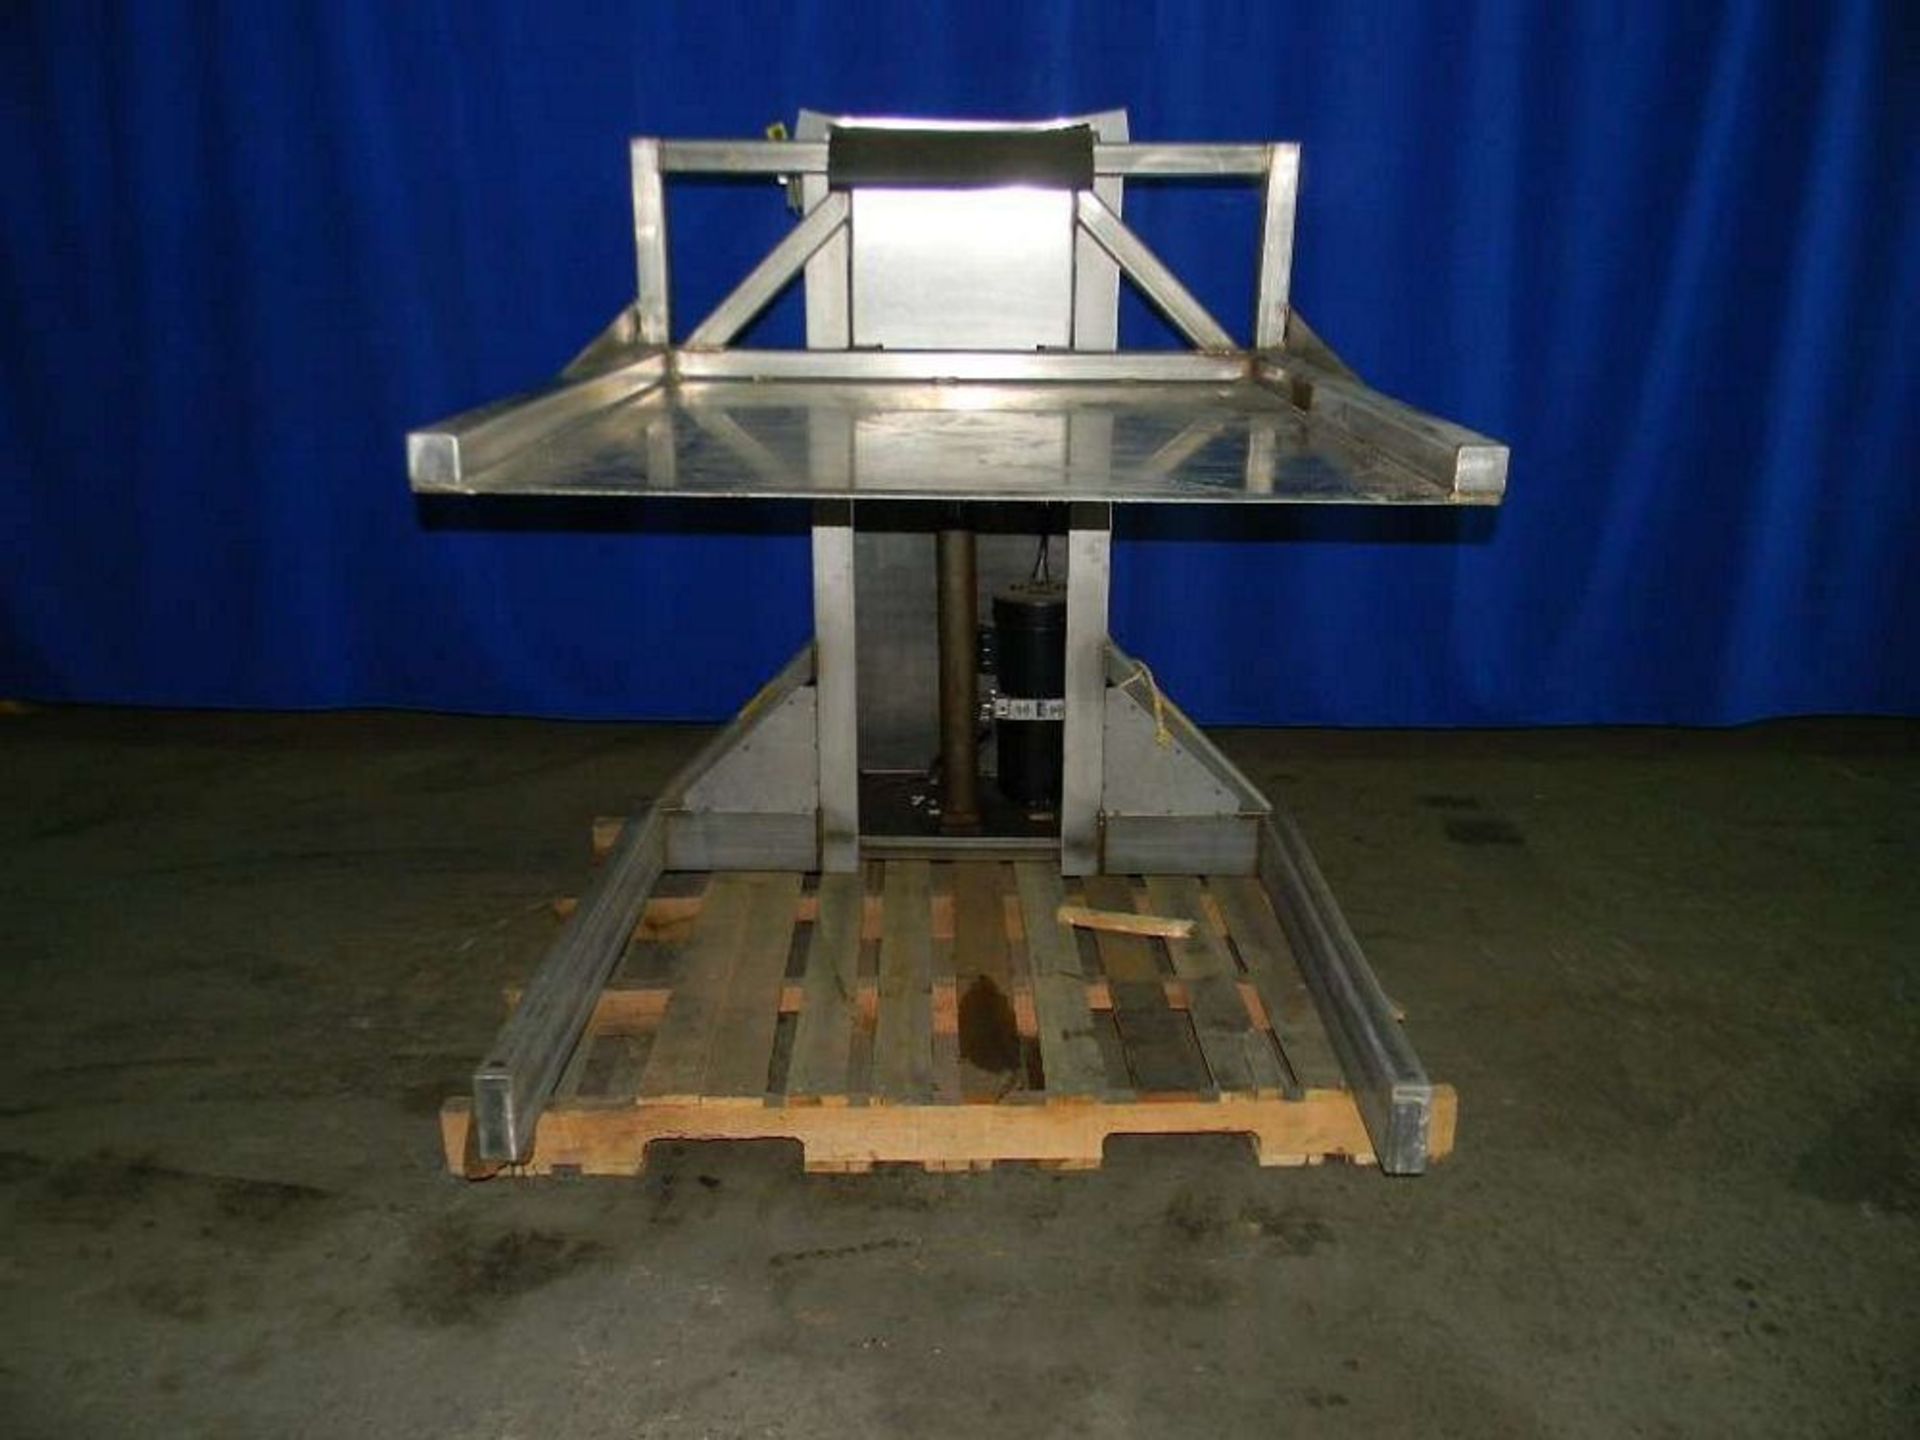 Qty (1) Unidex Stainless Pallet Elevator - All stainless steel pallet lift. - Platform 38' wide x - Image 2 of 4